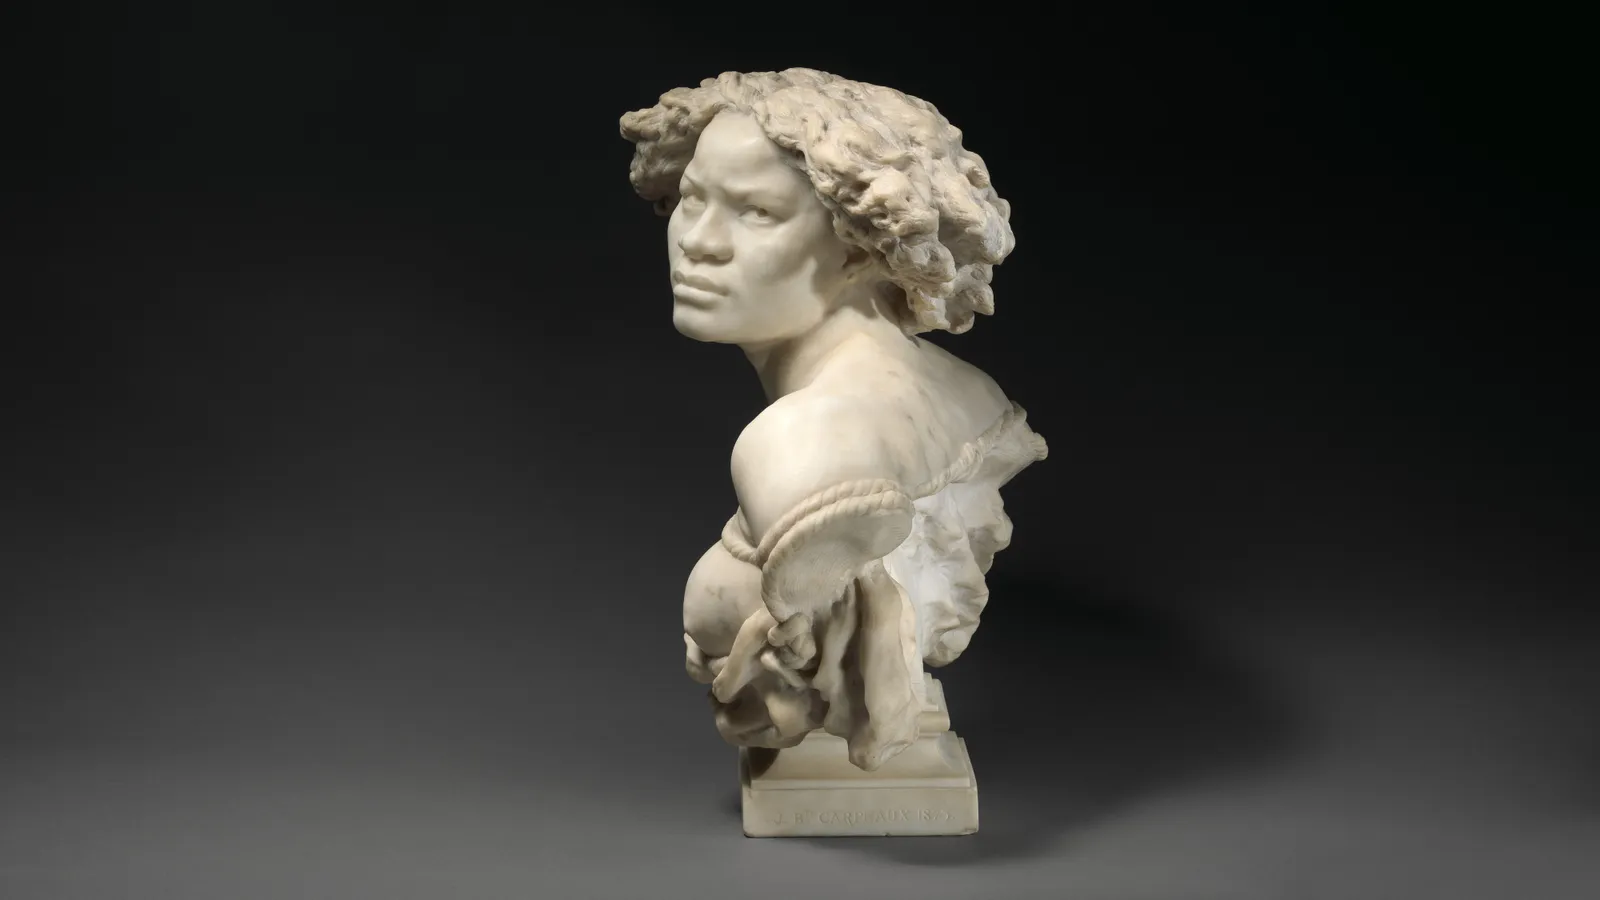 A Bold New Show at the Met Explores A Single Sculpture